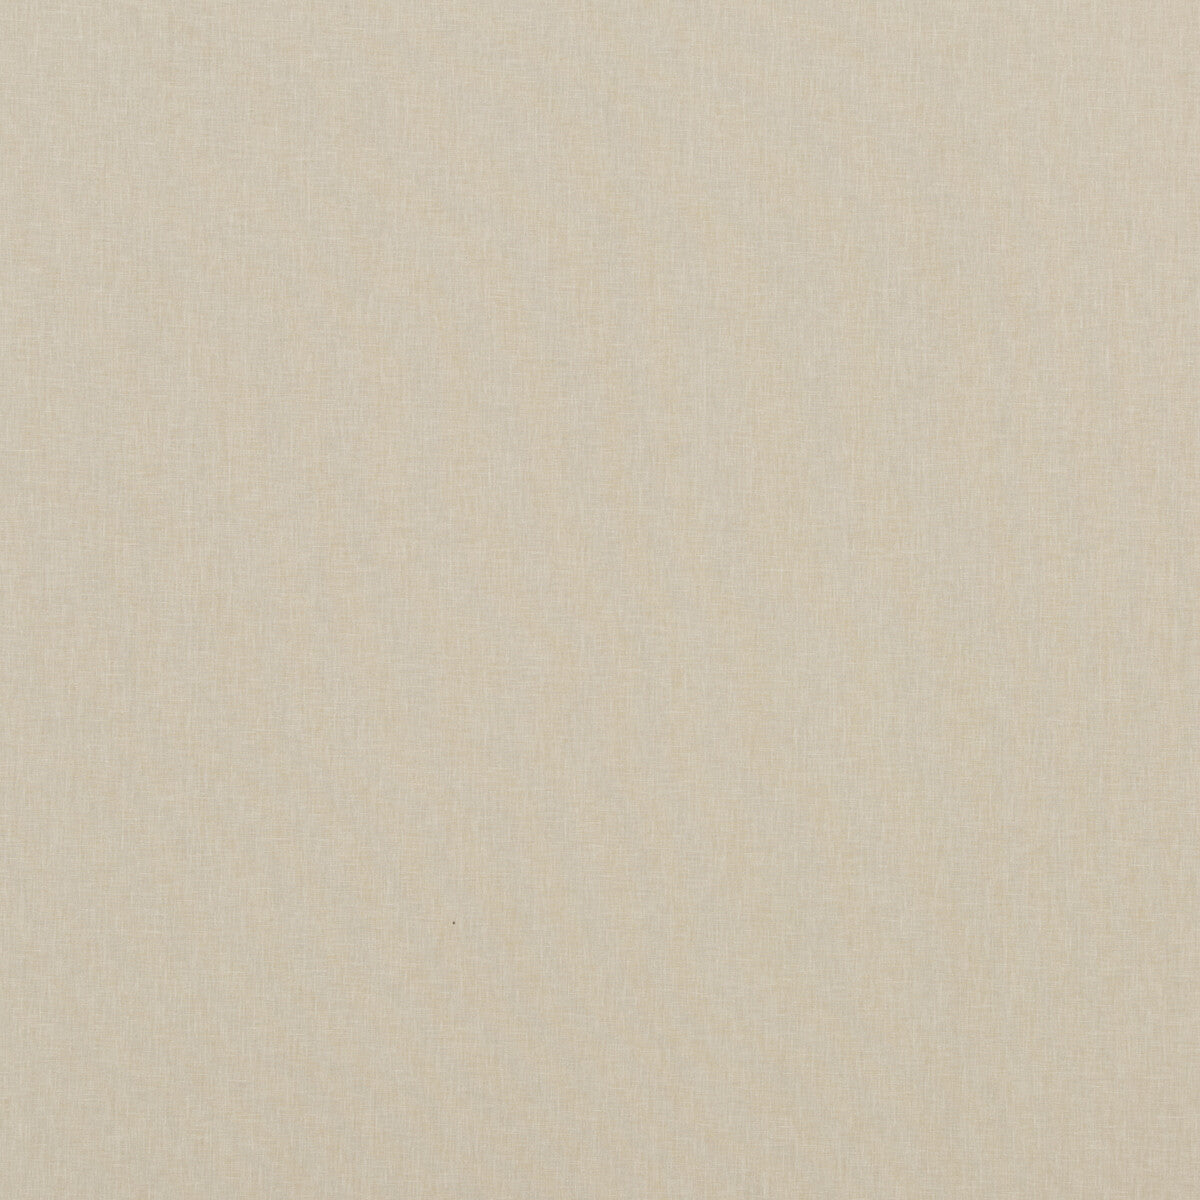 Carnival Plain fabric in oatmeal color - pattern PF50420.230.0 - by Baker Lifestyle in the Carnival collection